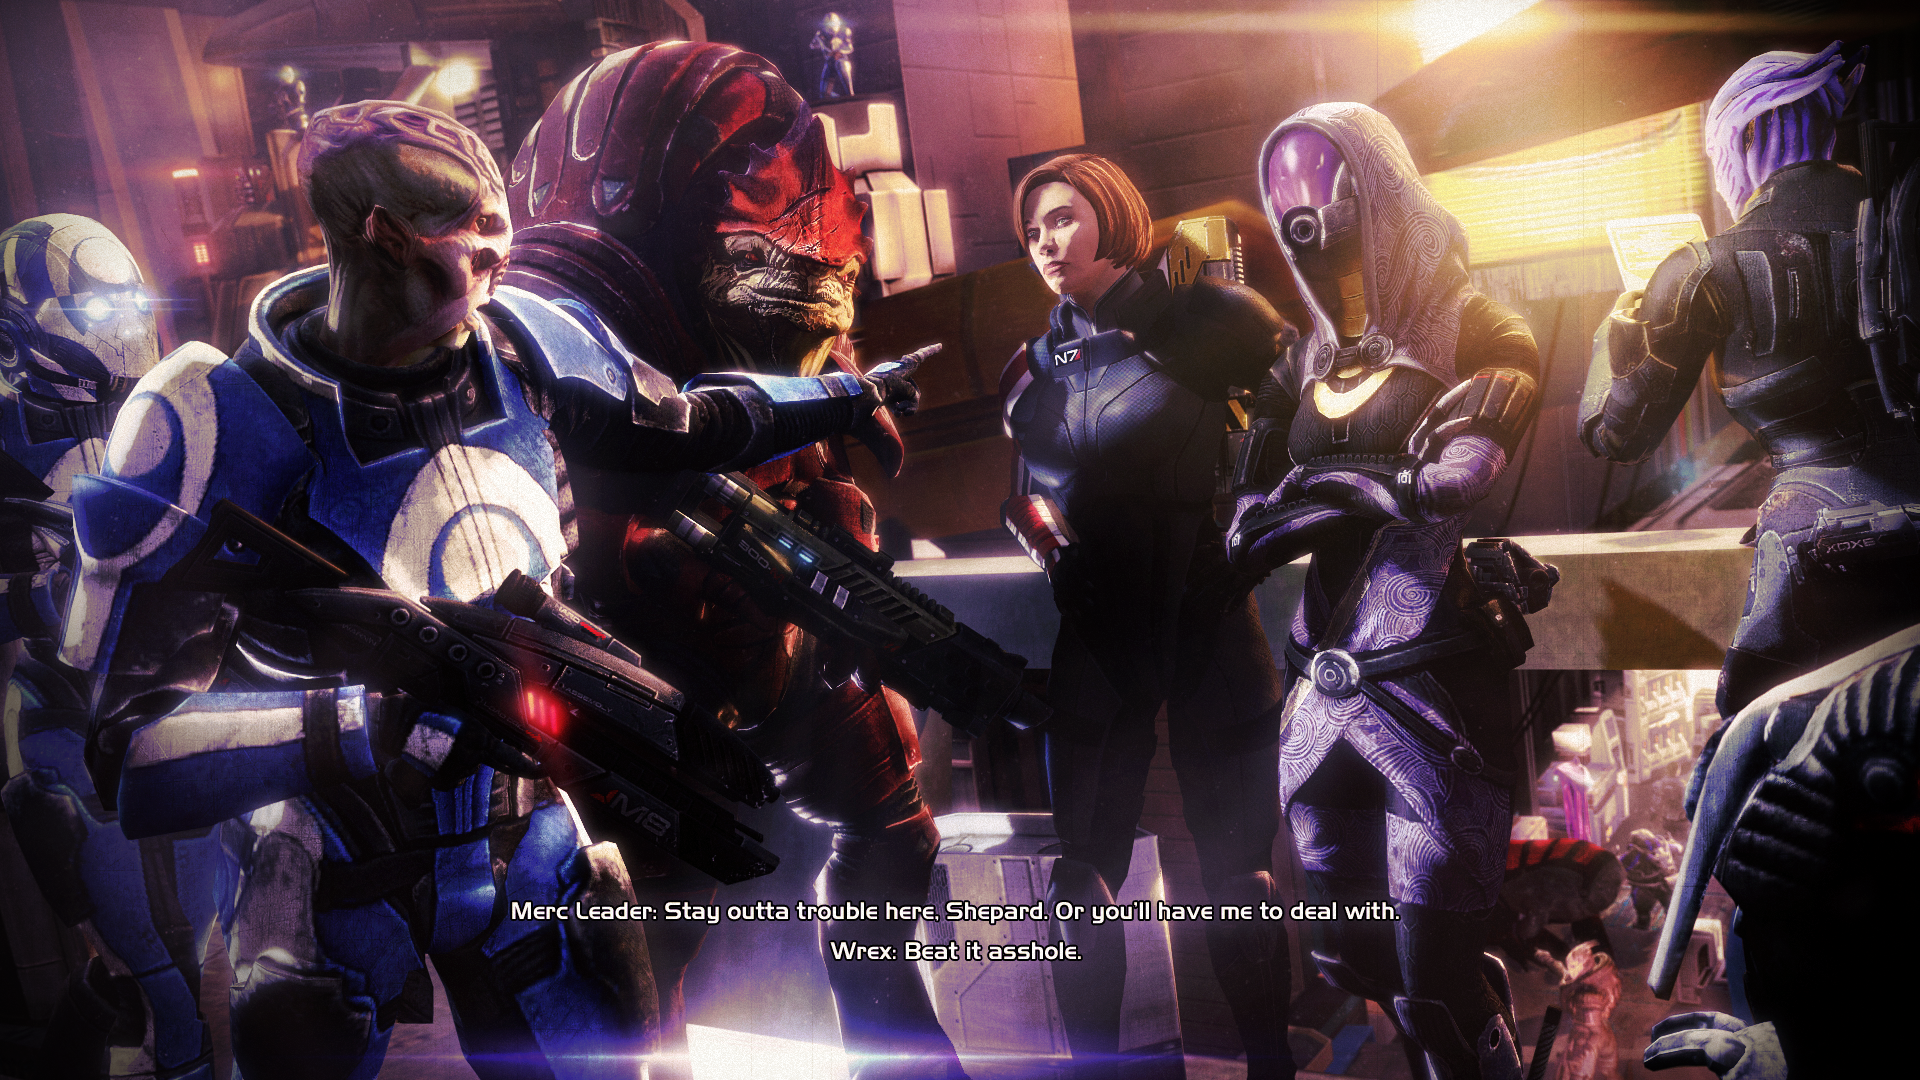 General 1920x1080 Mass Effect video game characters video games PC gaming CGI digital art science fiction